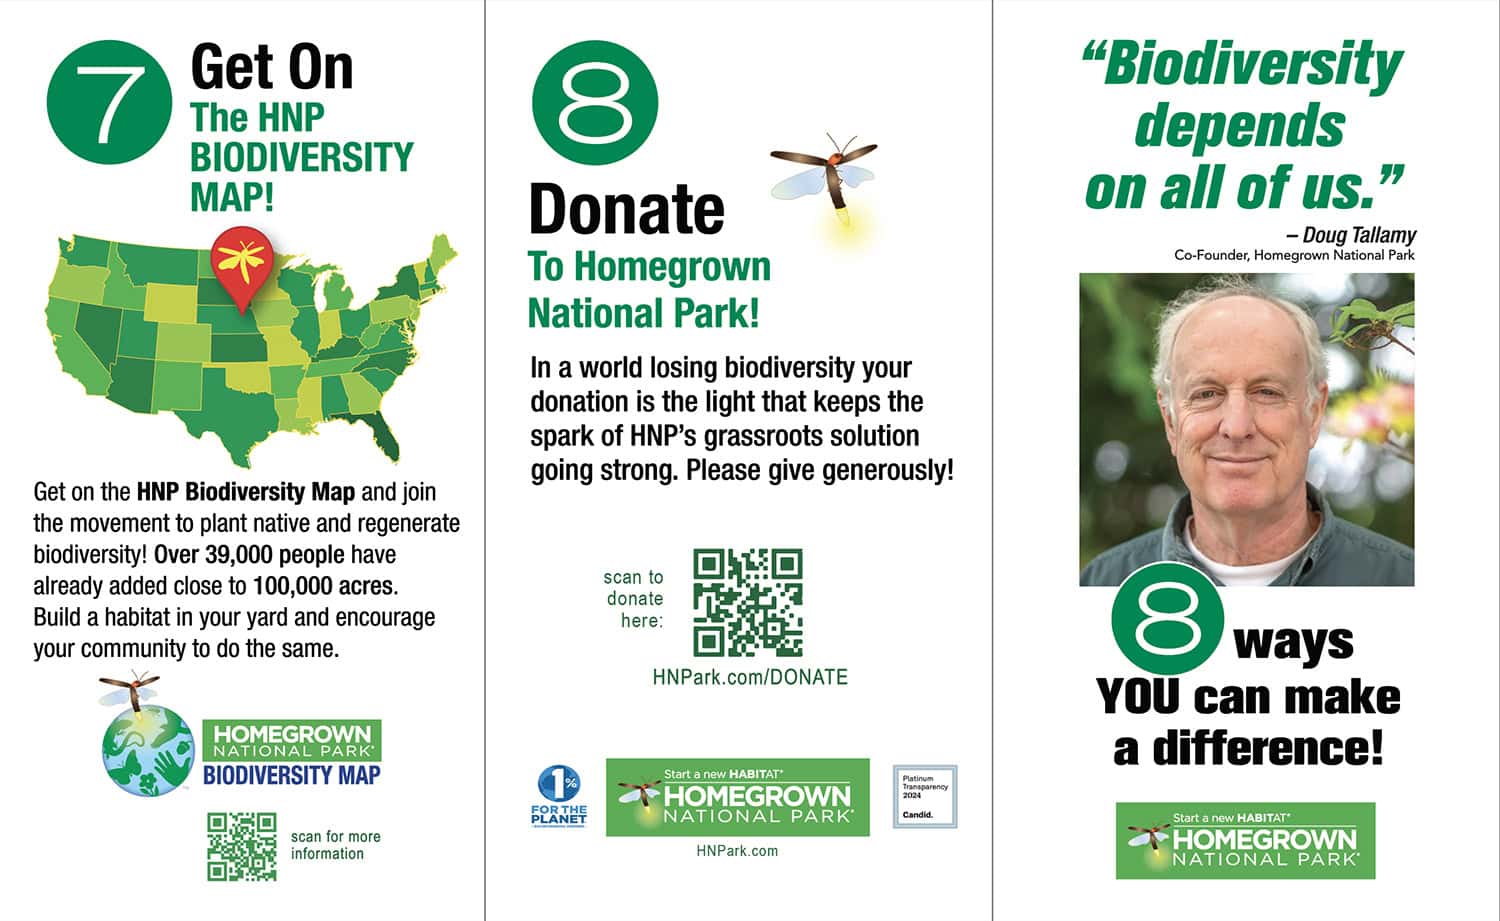 8 ways you can make a difference and regenerate biodiversity now - Homegrown National Park